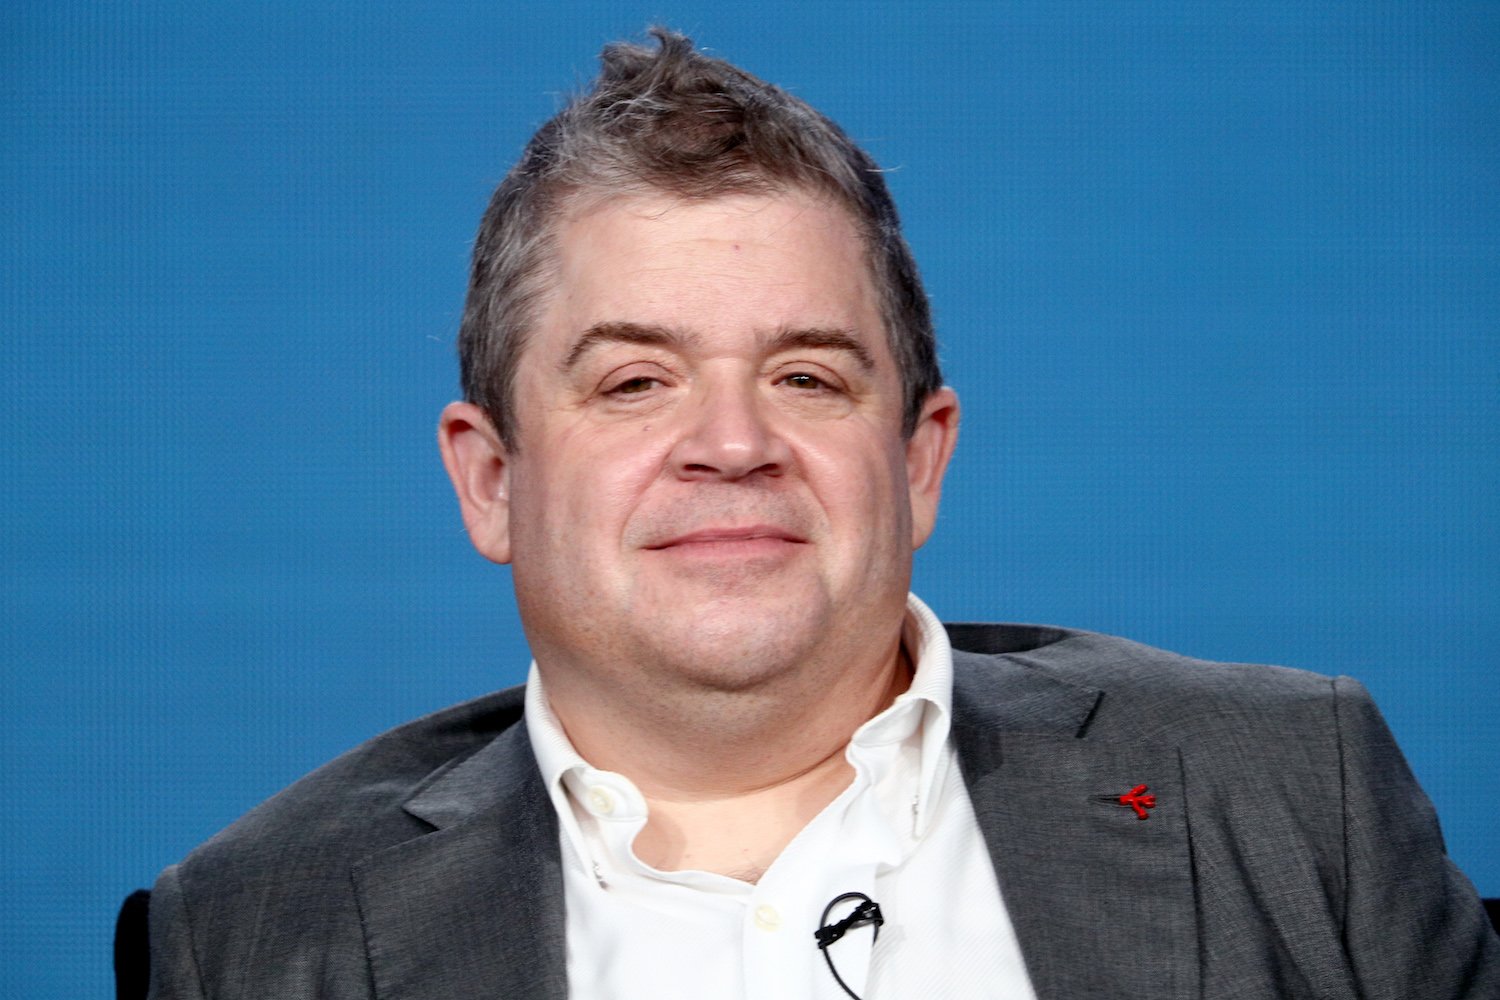 Patton Oswalt Accidentally Got So High That He Did a Whole Comedy Show With His Eyes Closed